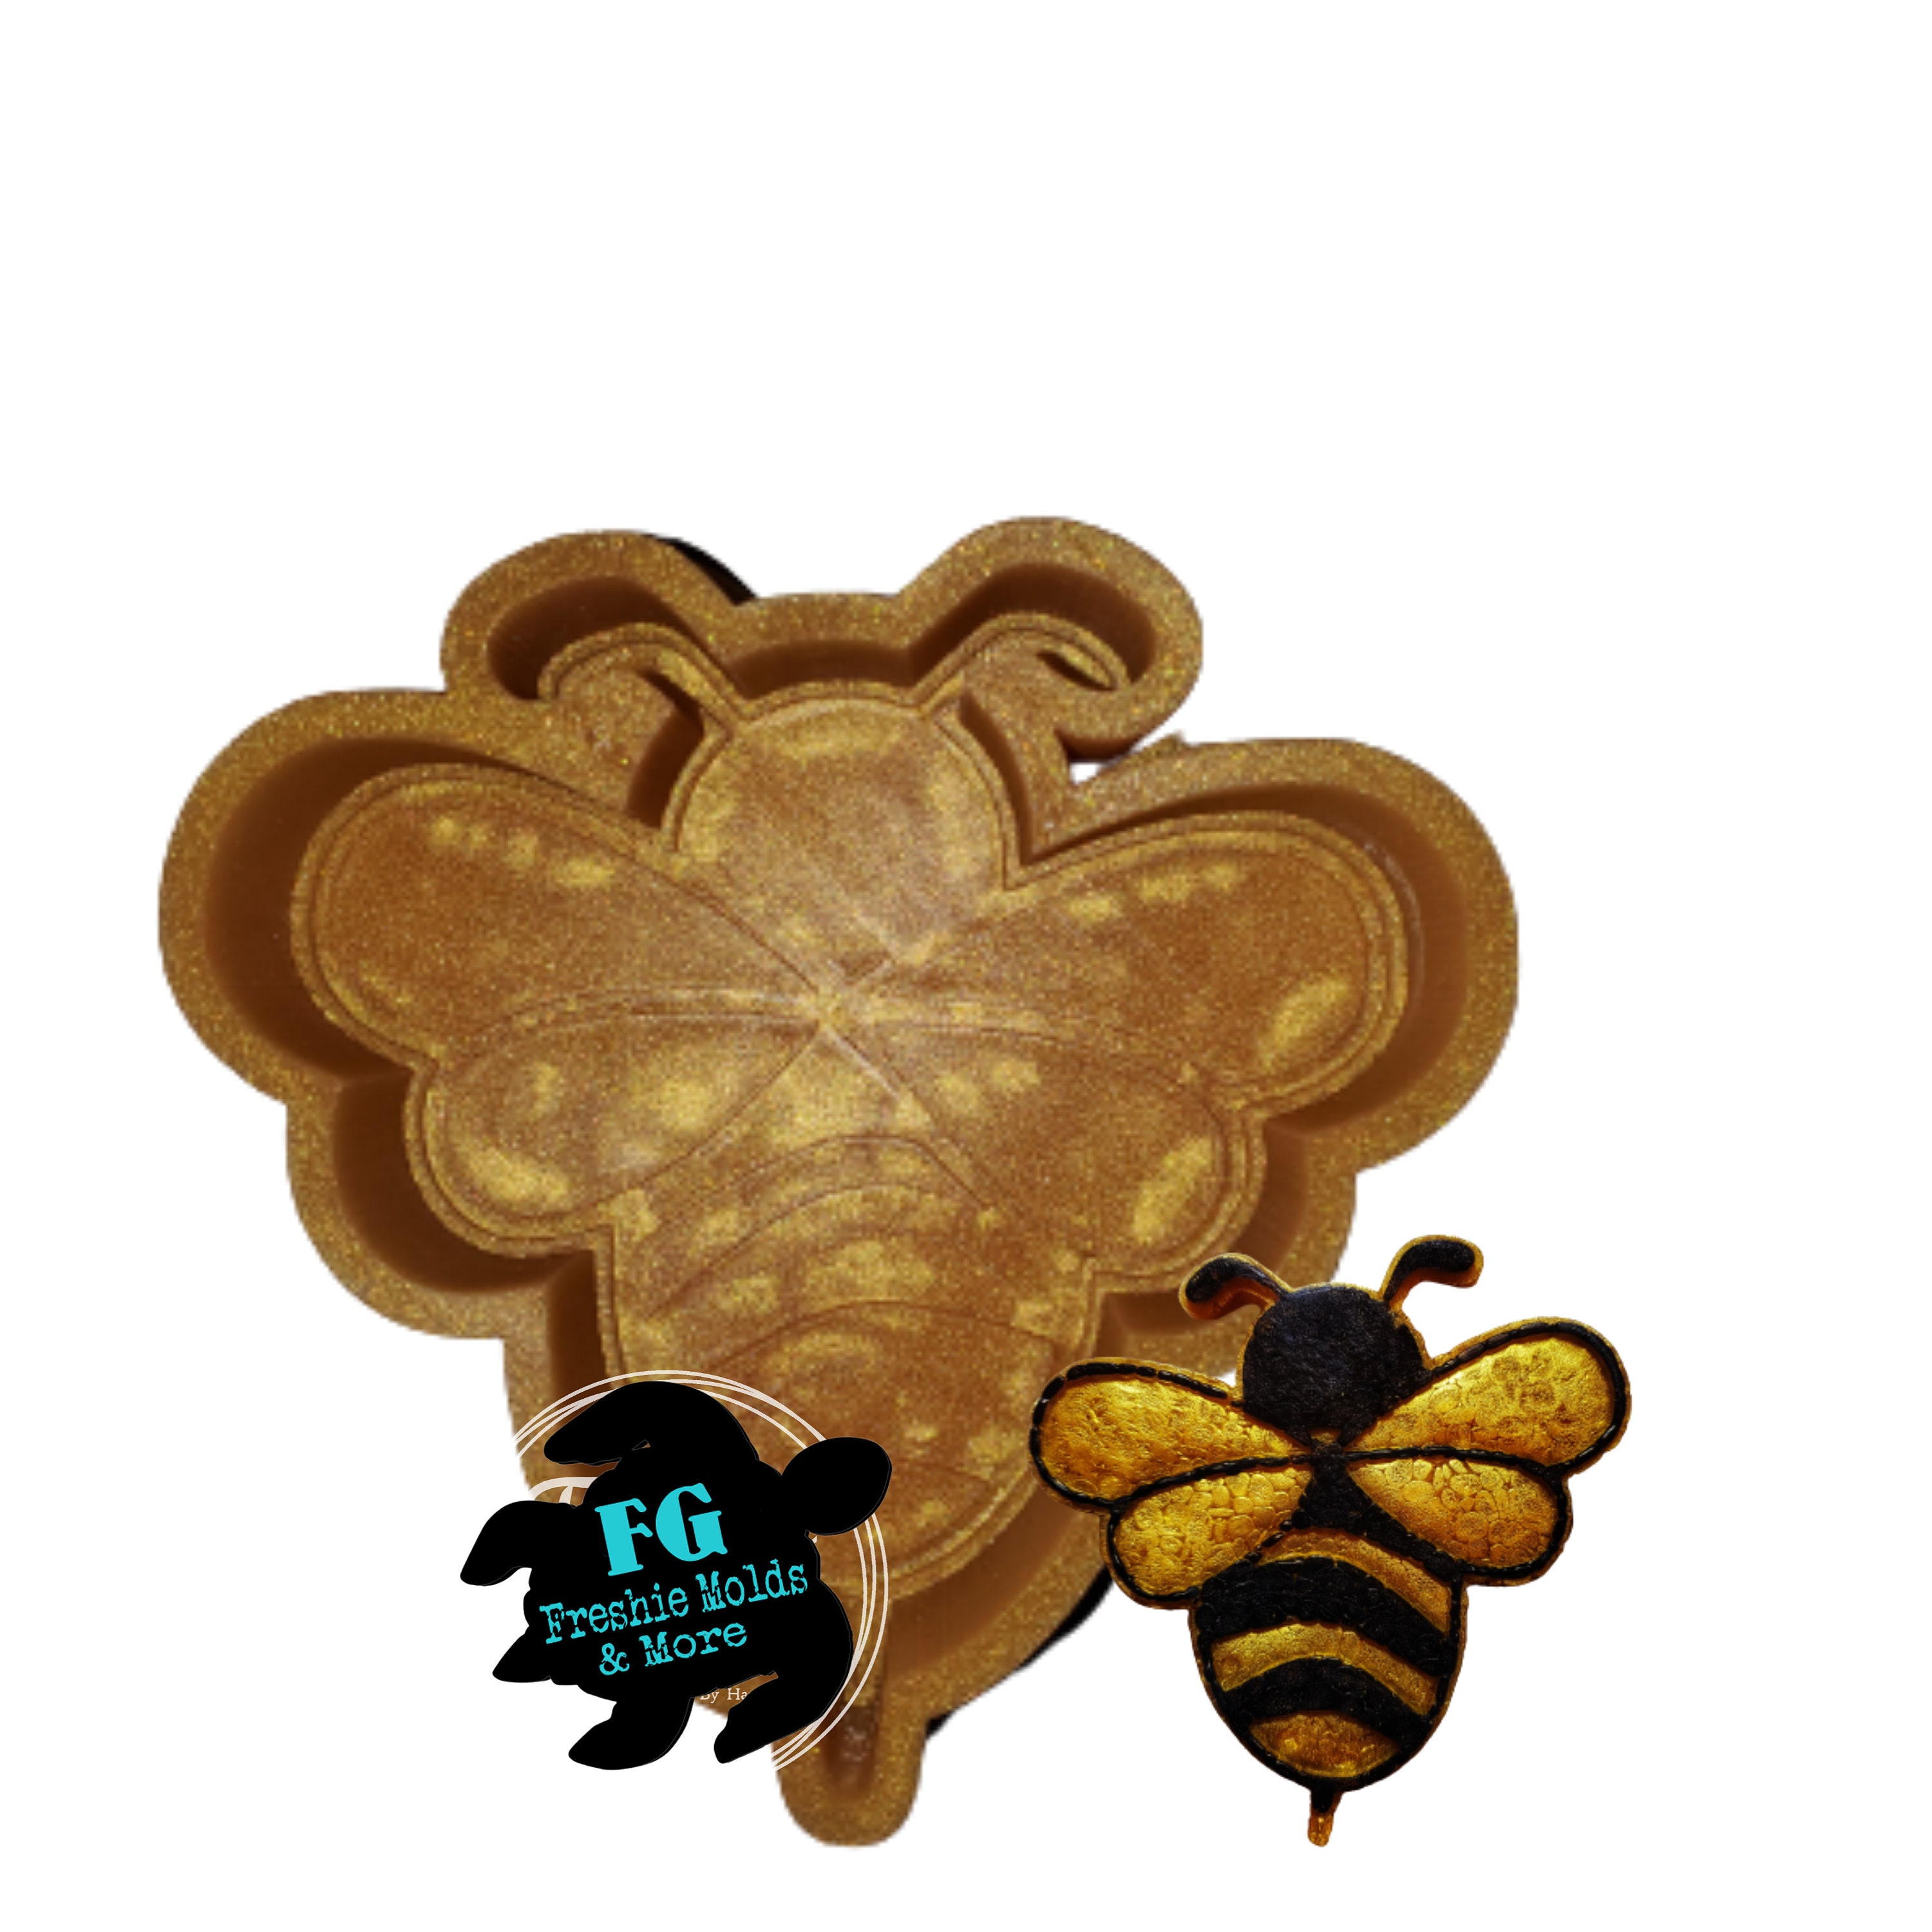 Oagsln 7 Cavity Bumble Bee Silicone Mold for Chocolate, Honeycomb Silicone Molds, Handmade Silicone Bee Baking Chocolate Molds, Cake Decorating Fondant